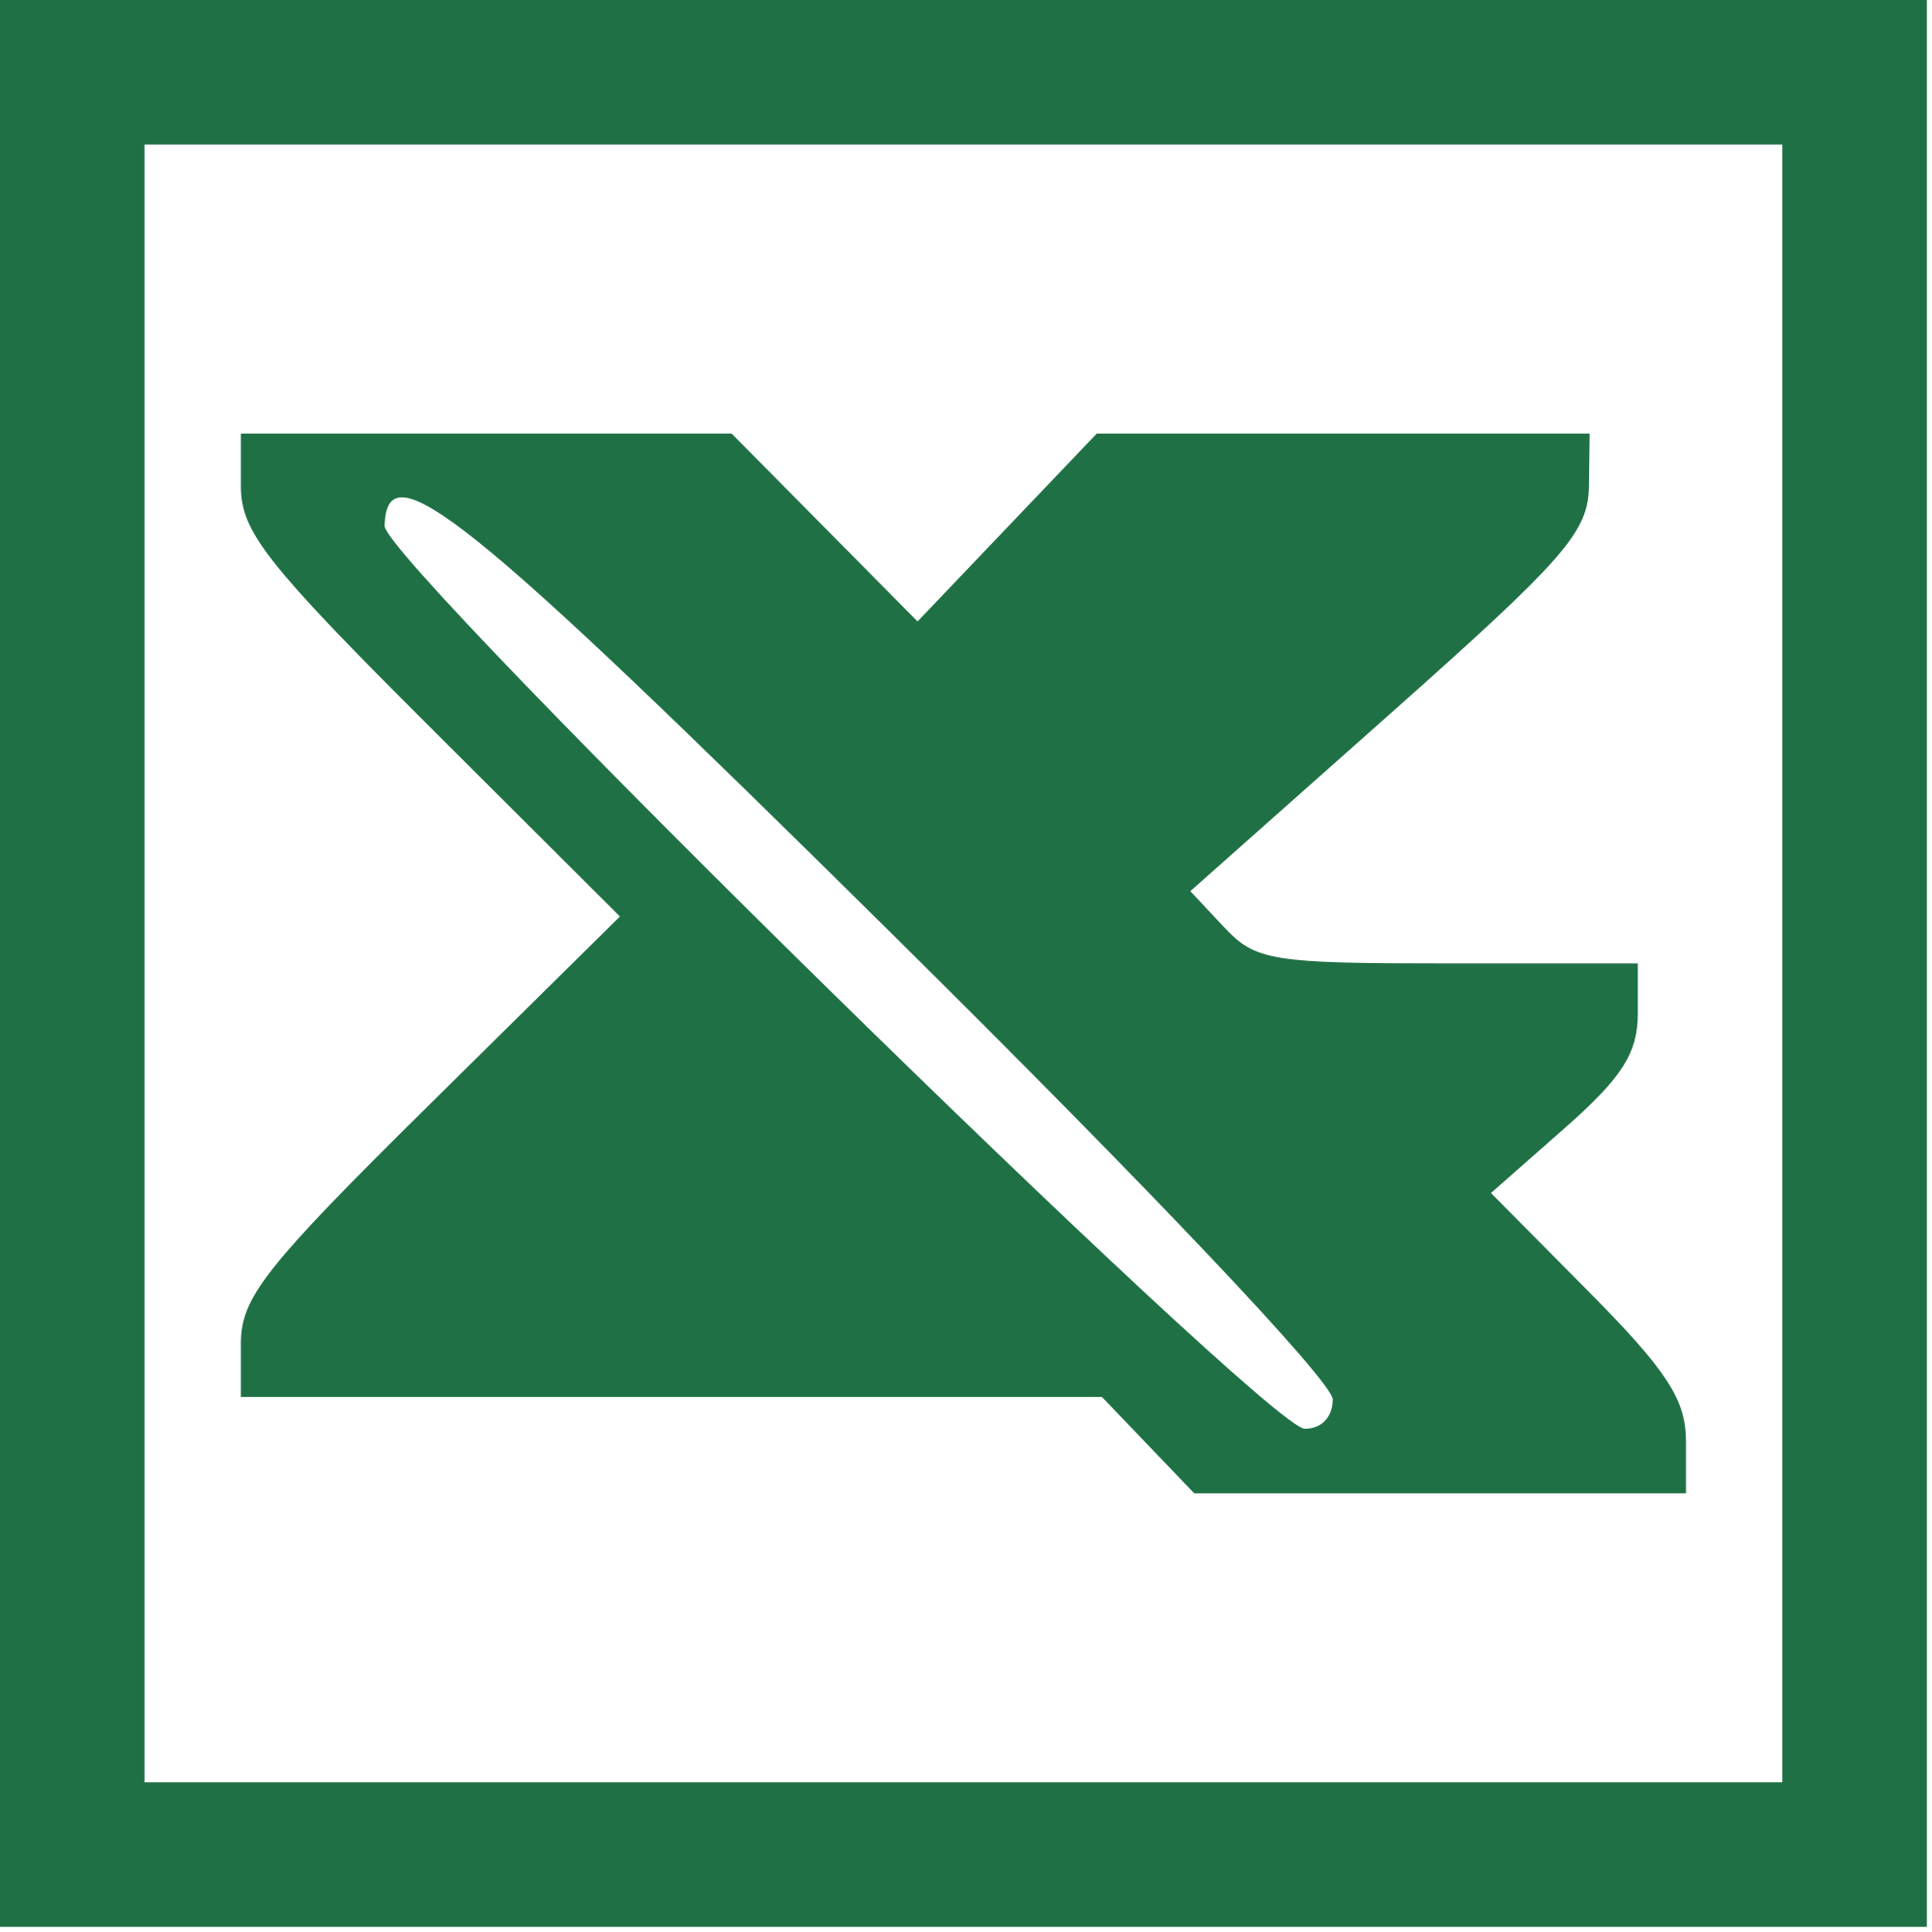 Microsoft Office Excel Logo - File:Microsoft Office Excel (2000–02).svg - Wikimedia Commons